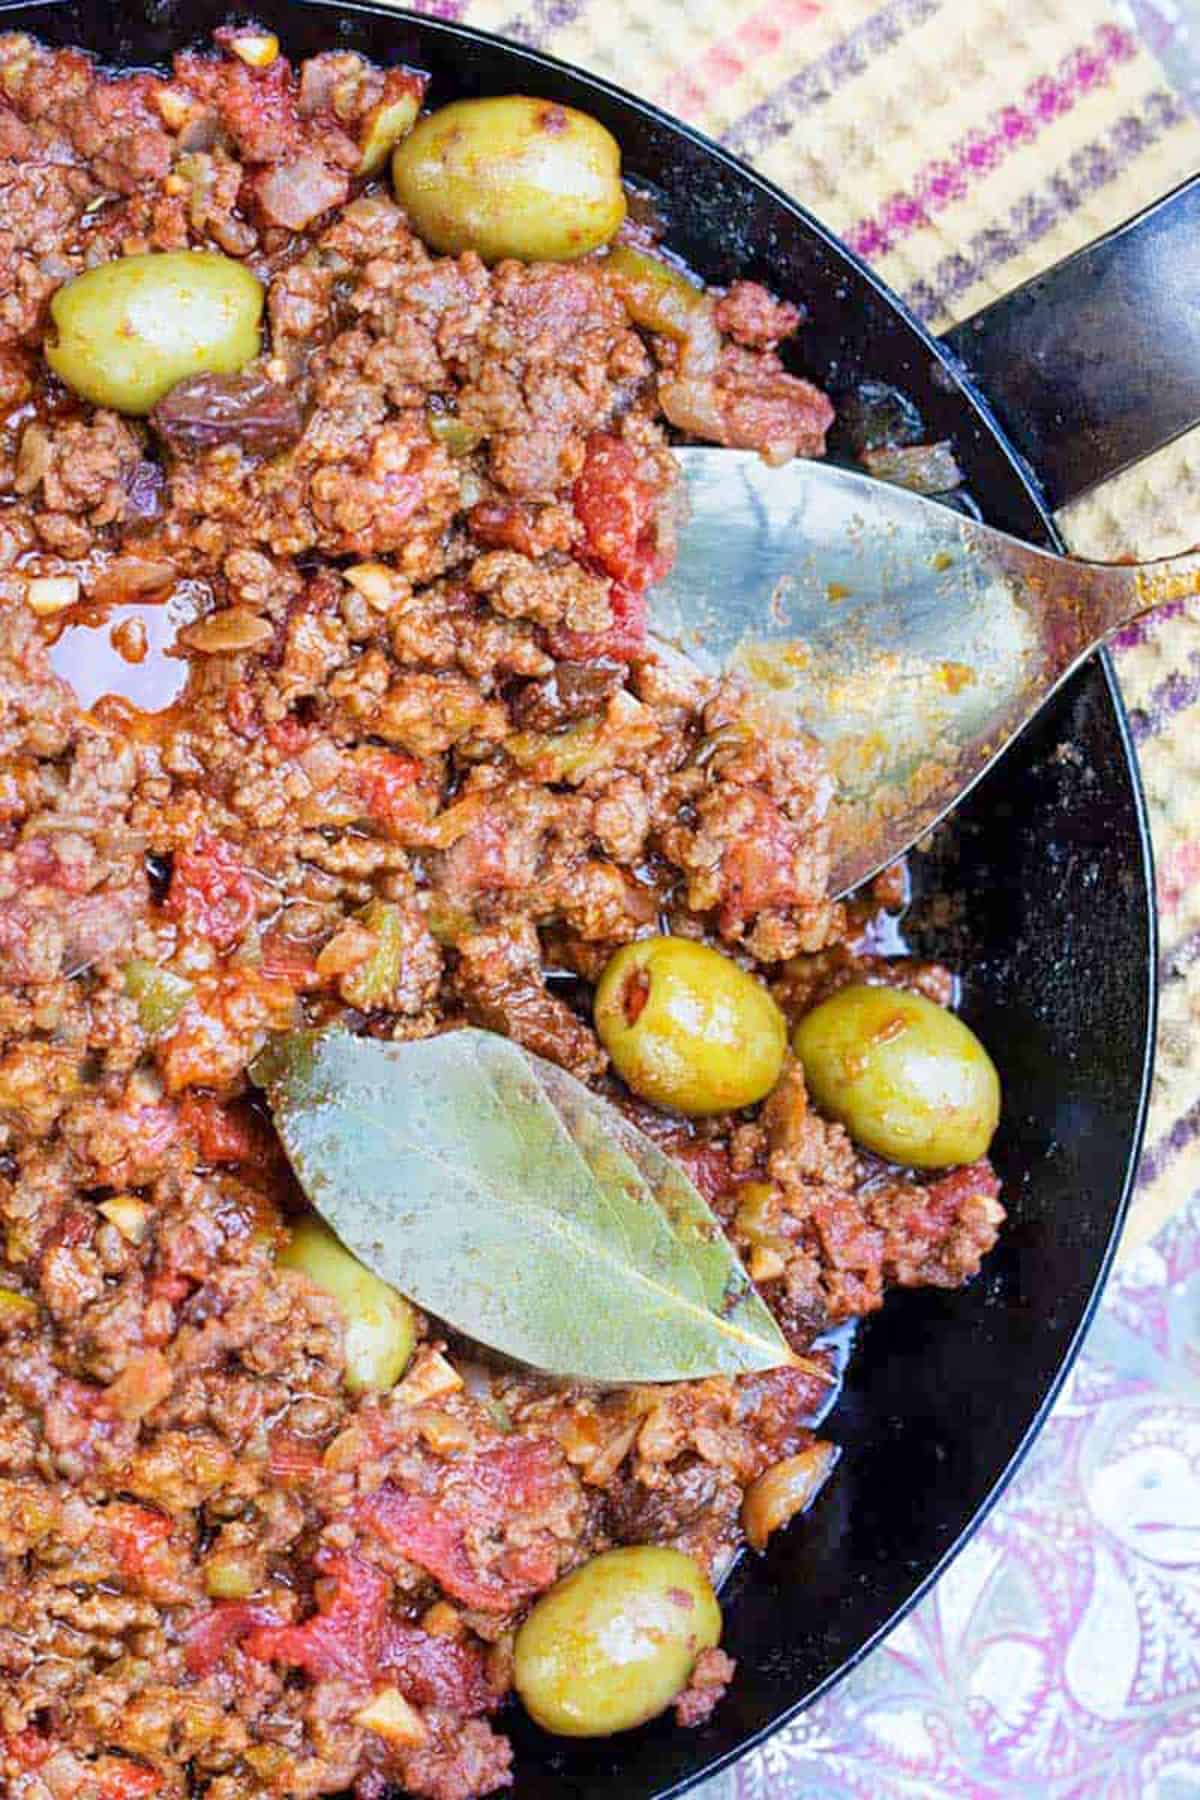 cuban picadillo: ground beef stew with olives, in a black skillet with green olives and a bay leaf